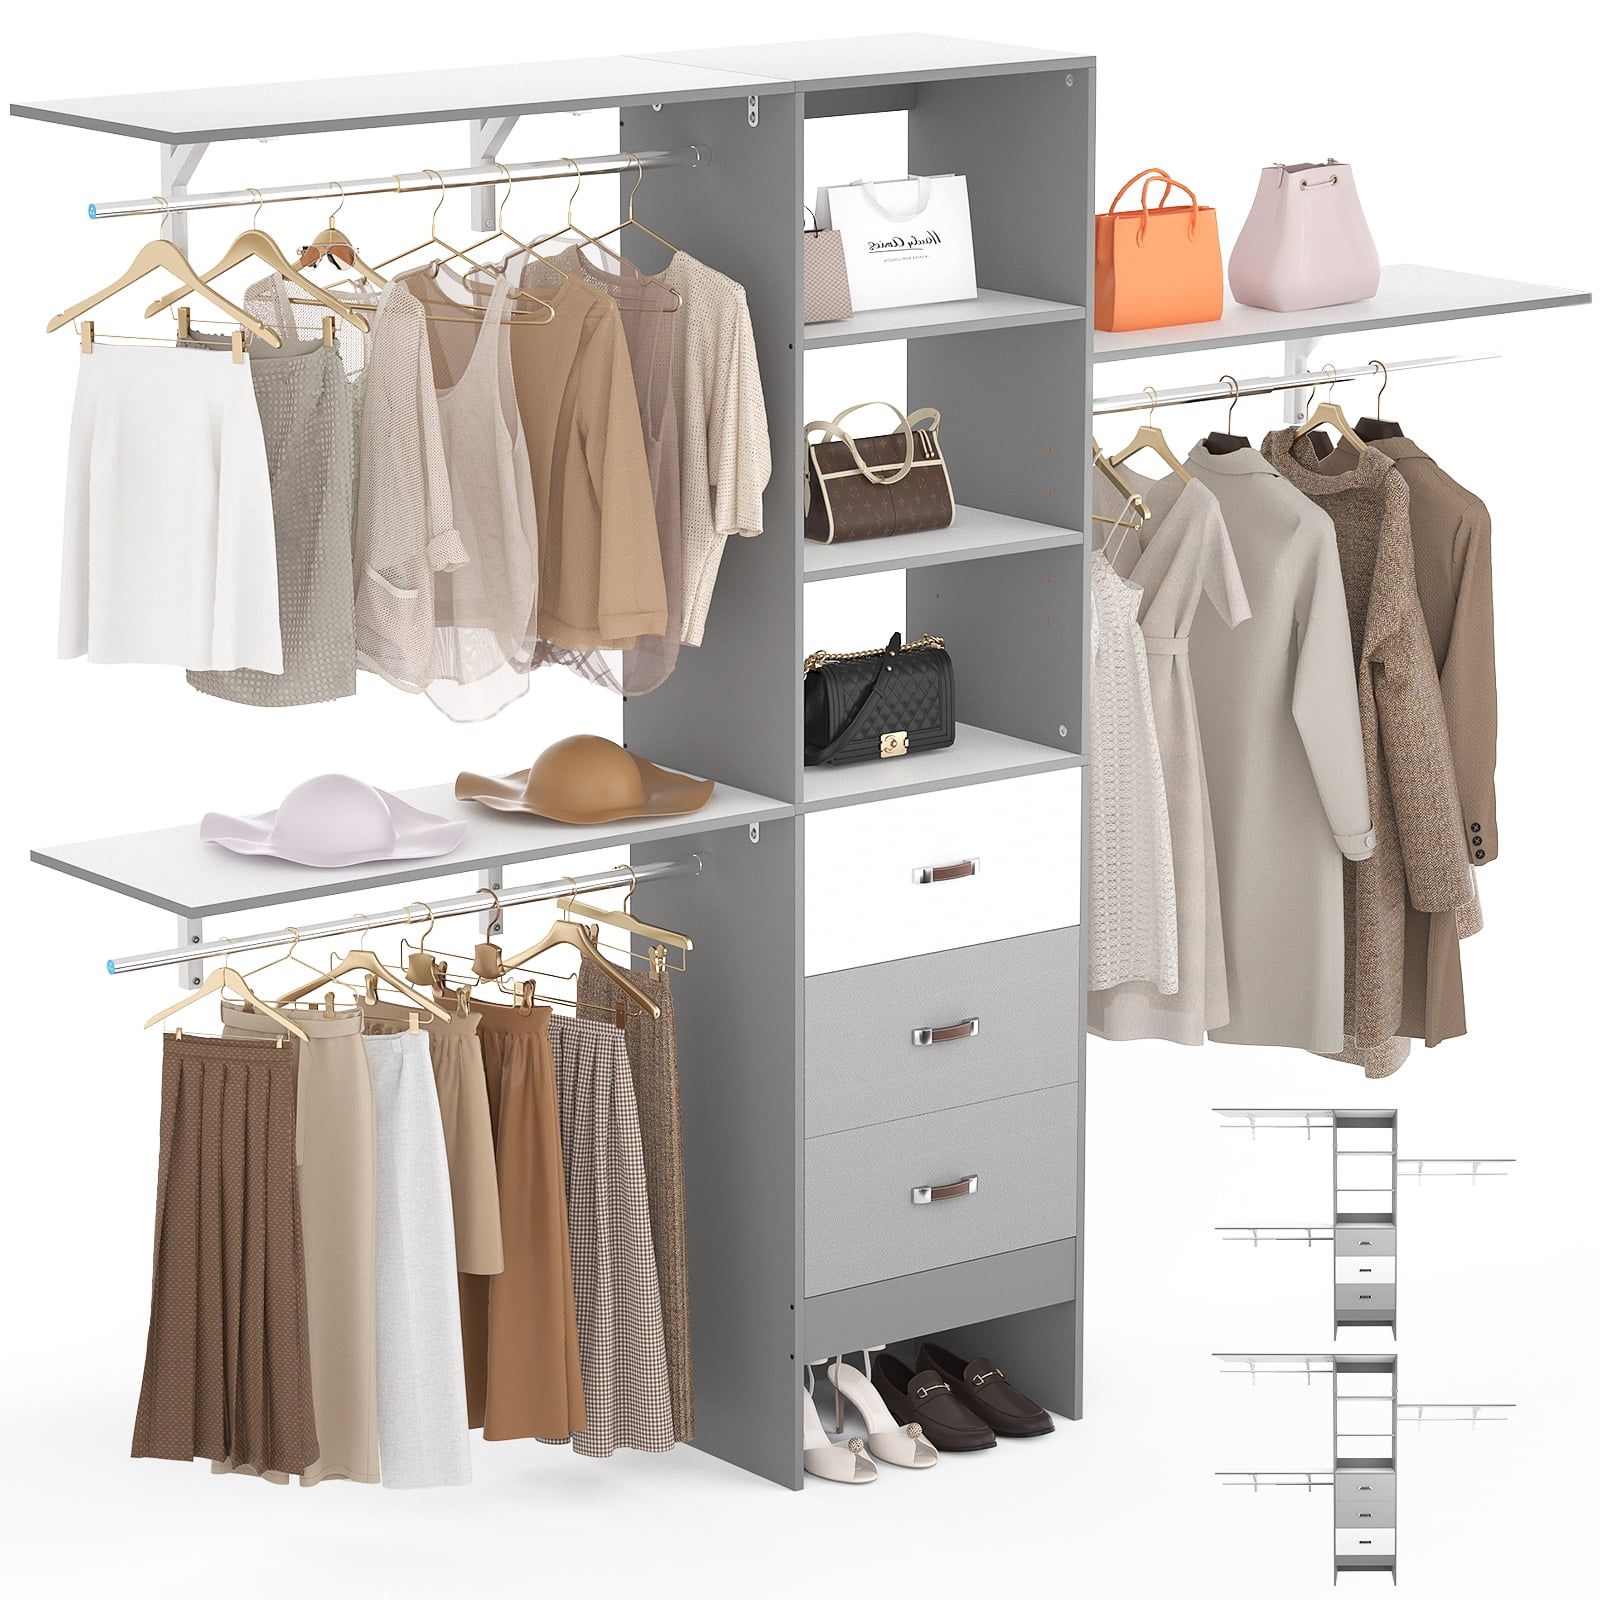 2018 96 Inches Wardrobes Inside Homieasy 96 Inches Closet System, 8ft Walk In Closet Organizer With 3  Shelving Towers, Heavy Duty Clothes Rack With 3 Drawers, Built In Garment  Rack, 96" L X 16" W X 75" H, (View 6 of 10)